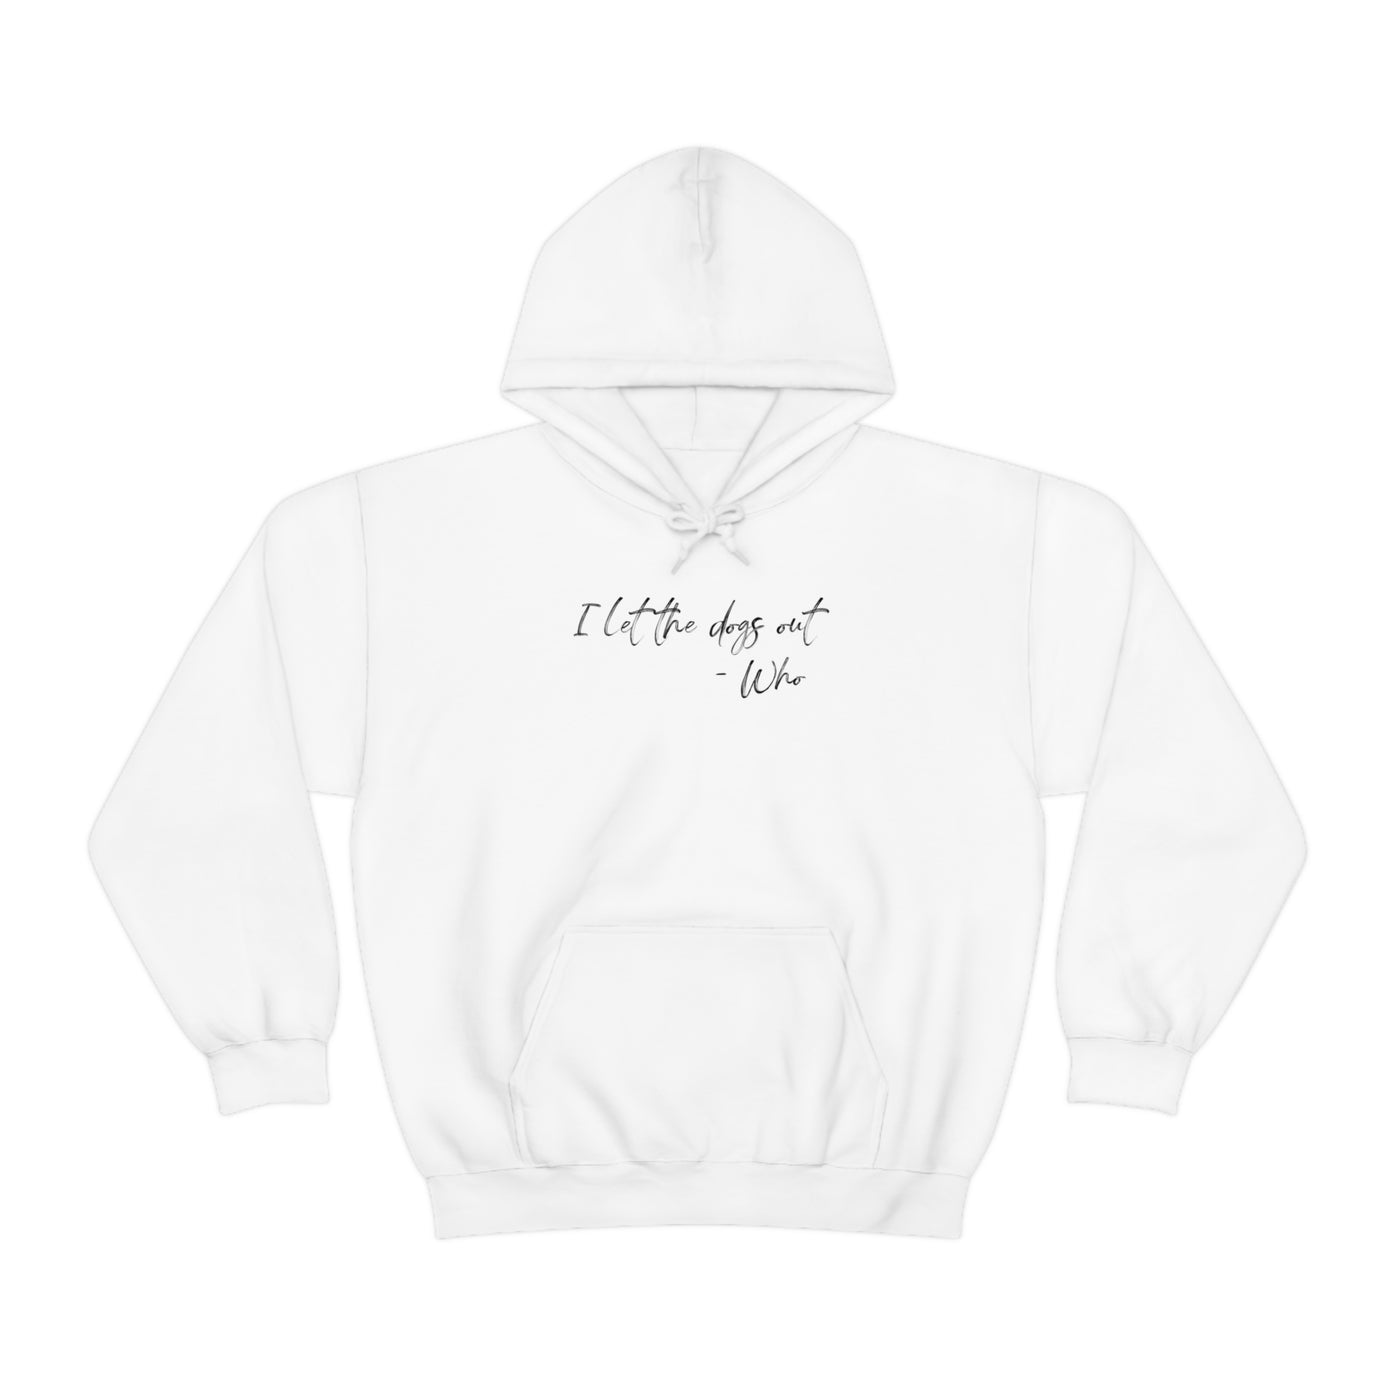 I Let The Dogs Out Unisex Hoodie